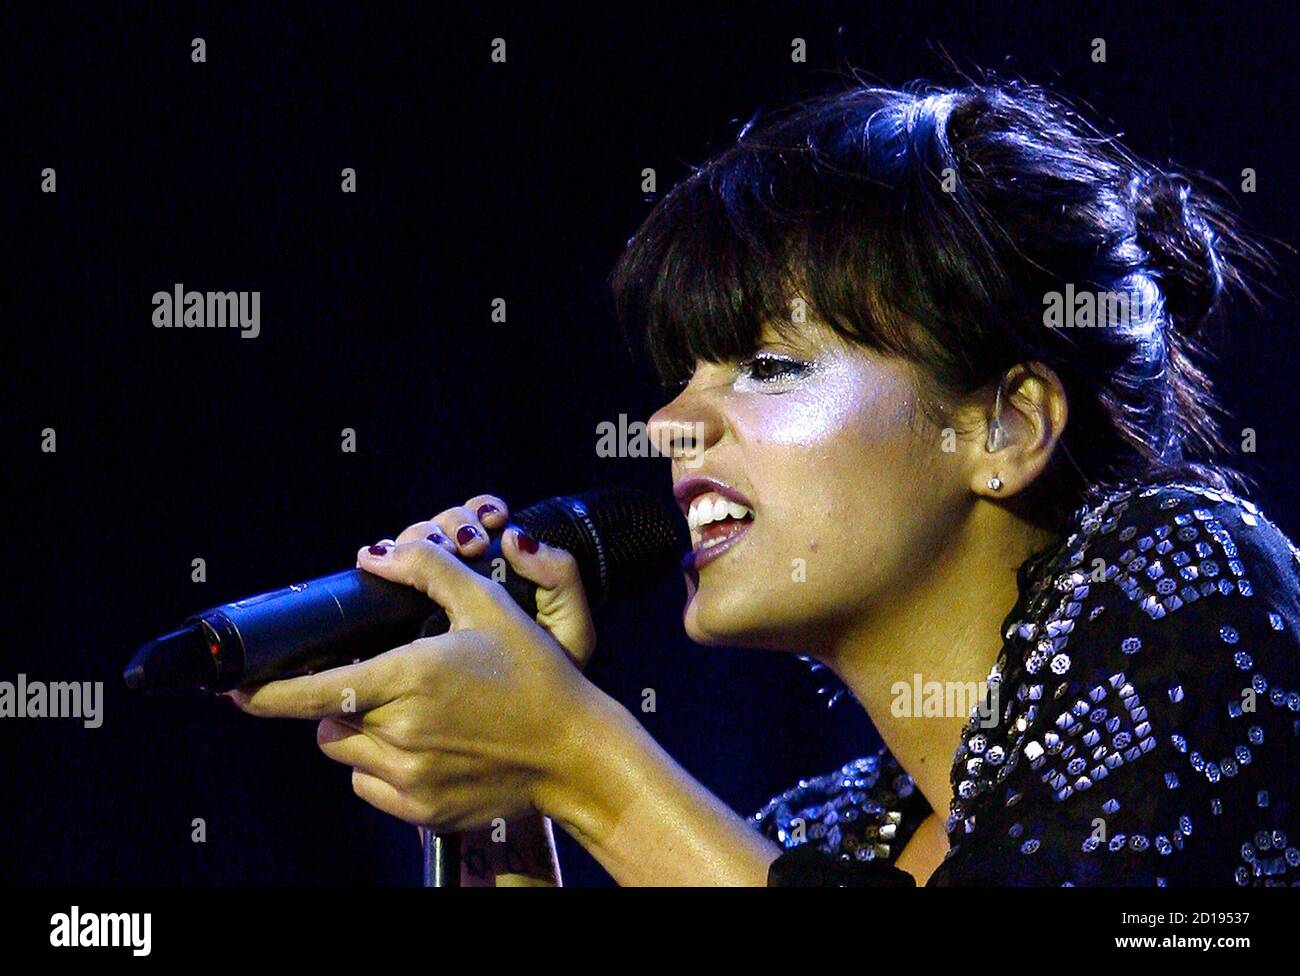 British singer Lily Allen performs at the EXIT music festival in the  northern Serbian town of Novi Sad July 9, 2009. The annual festival has  become one of the most popular of